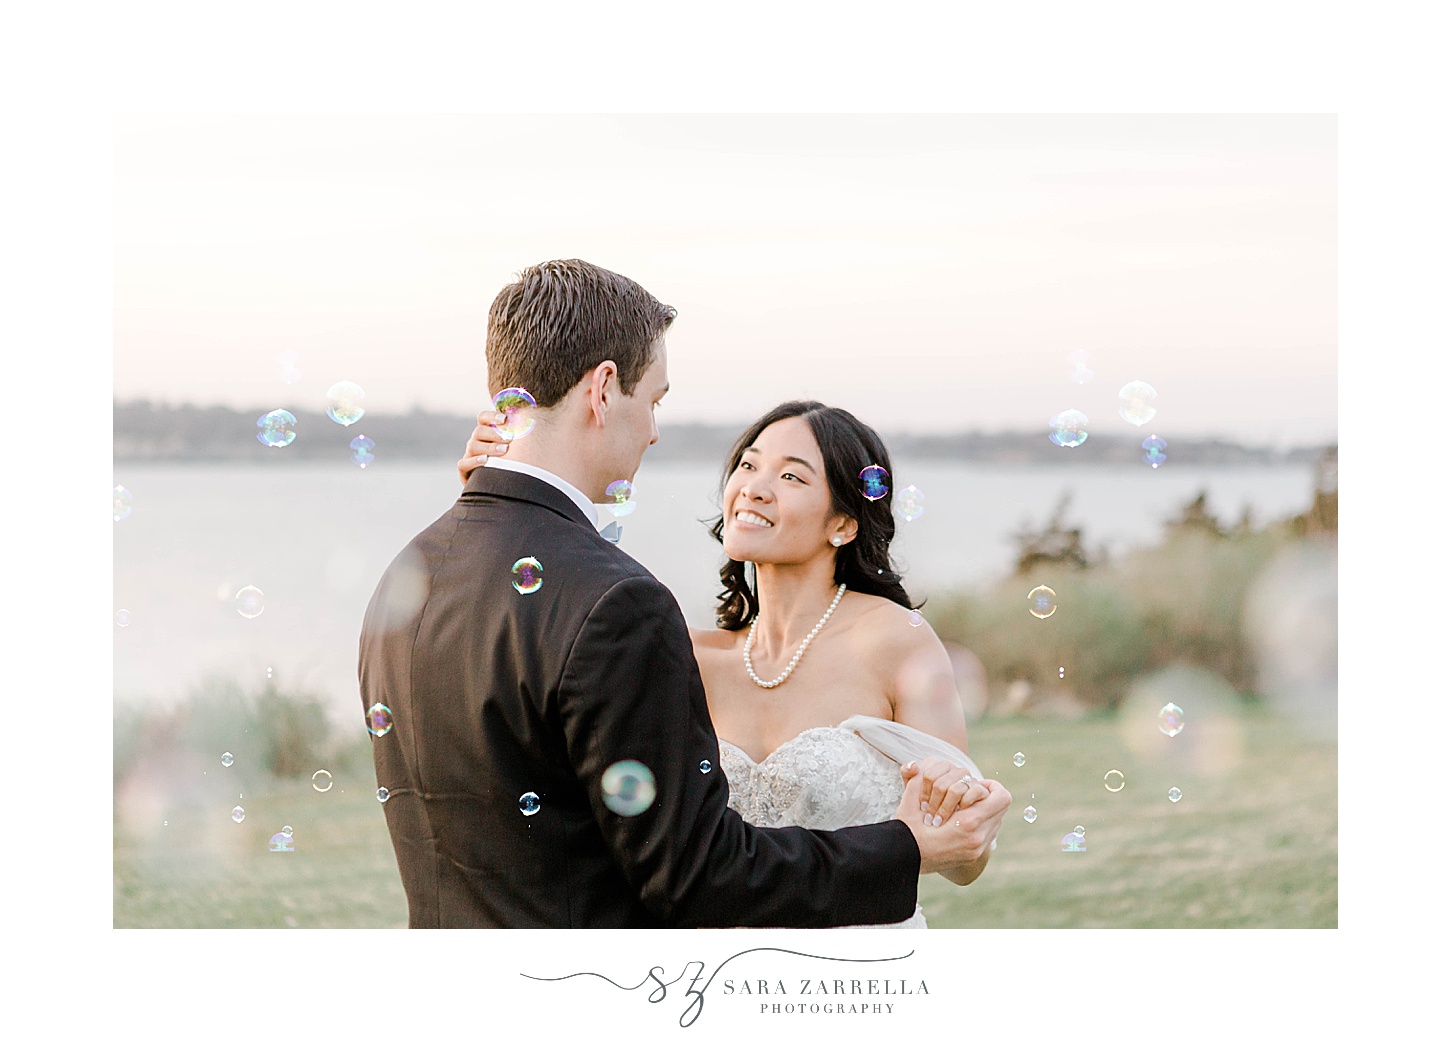 newlyweds dance together at sunset near water while bubbles float around them